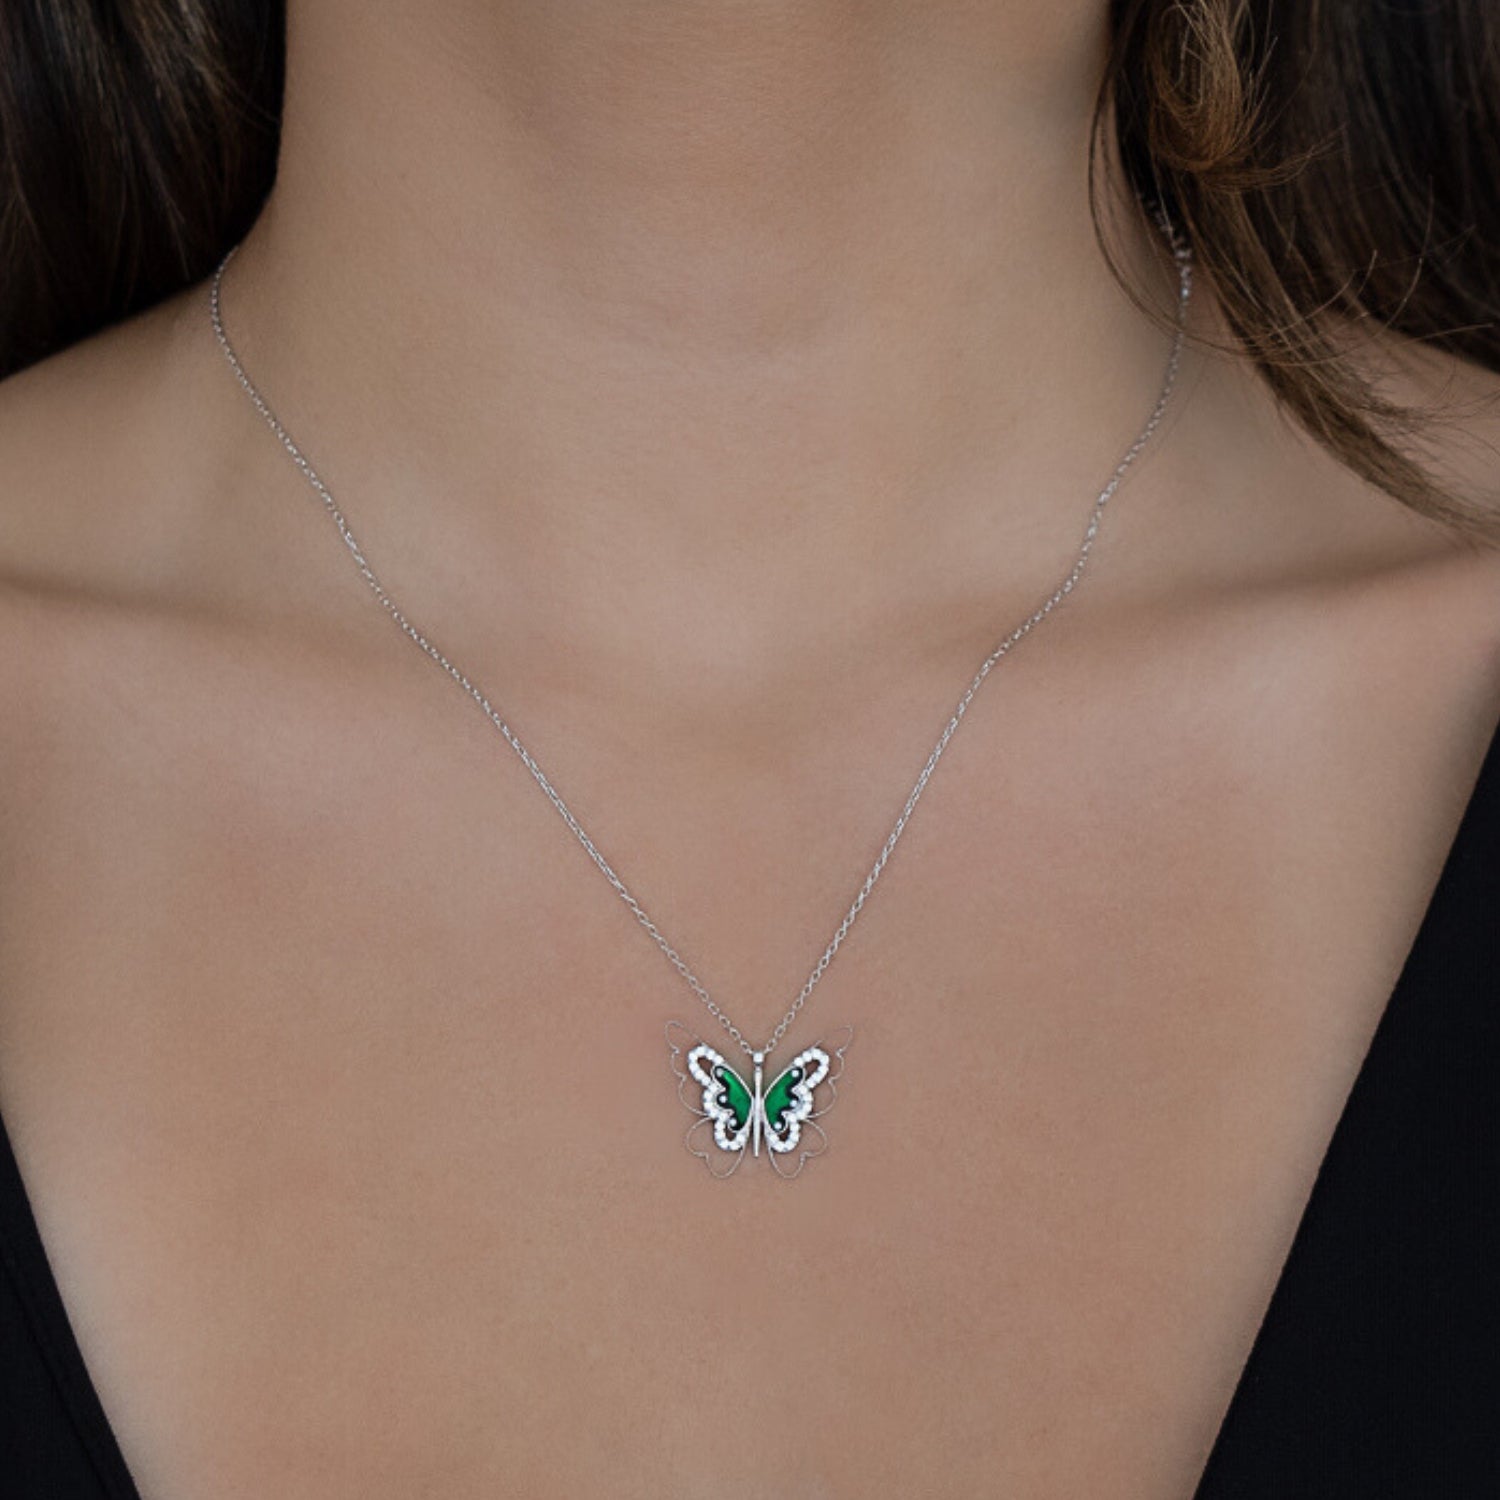 A model wearing the Abundance Green Butterfly Necklace, radiating elegance and transformation.